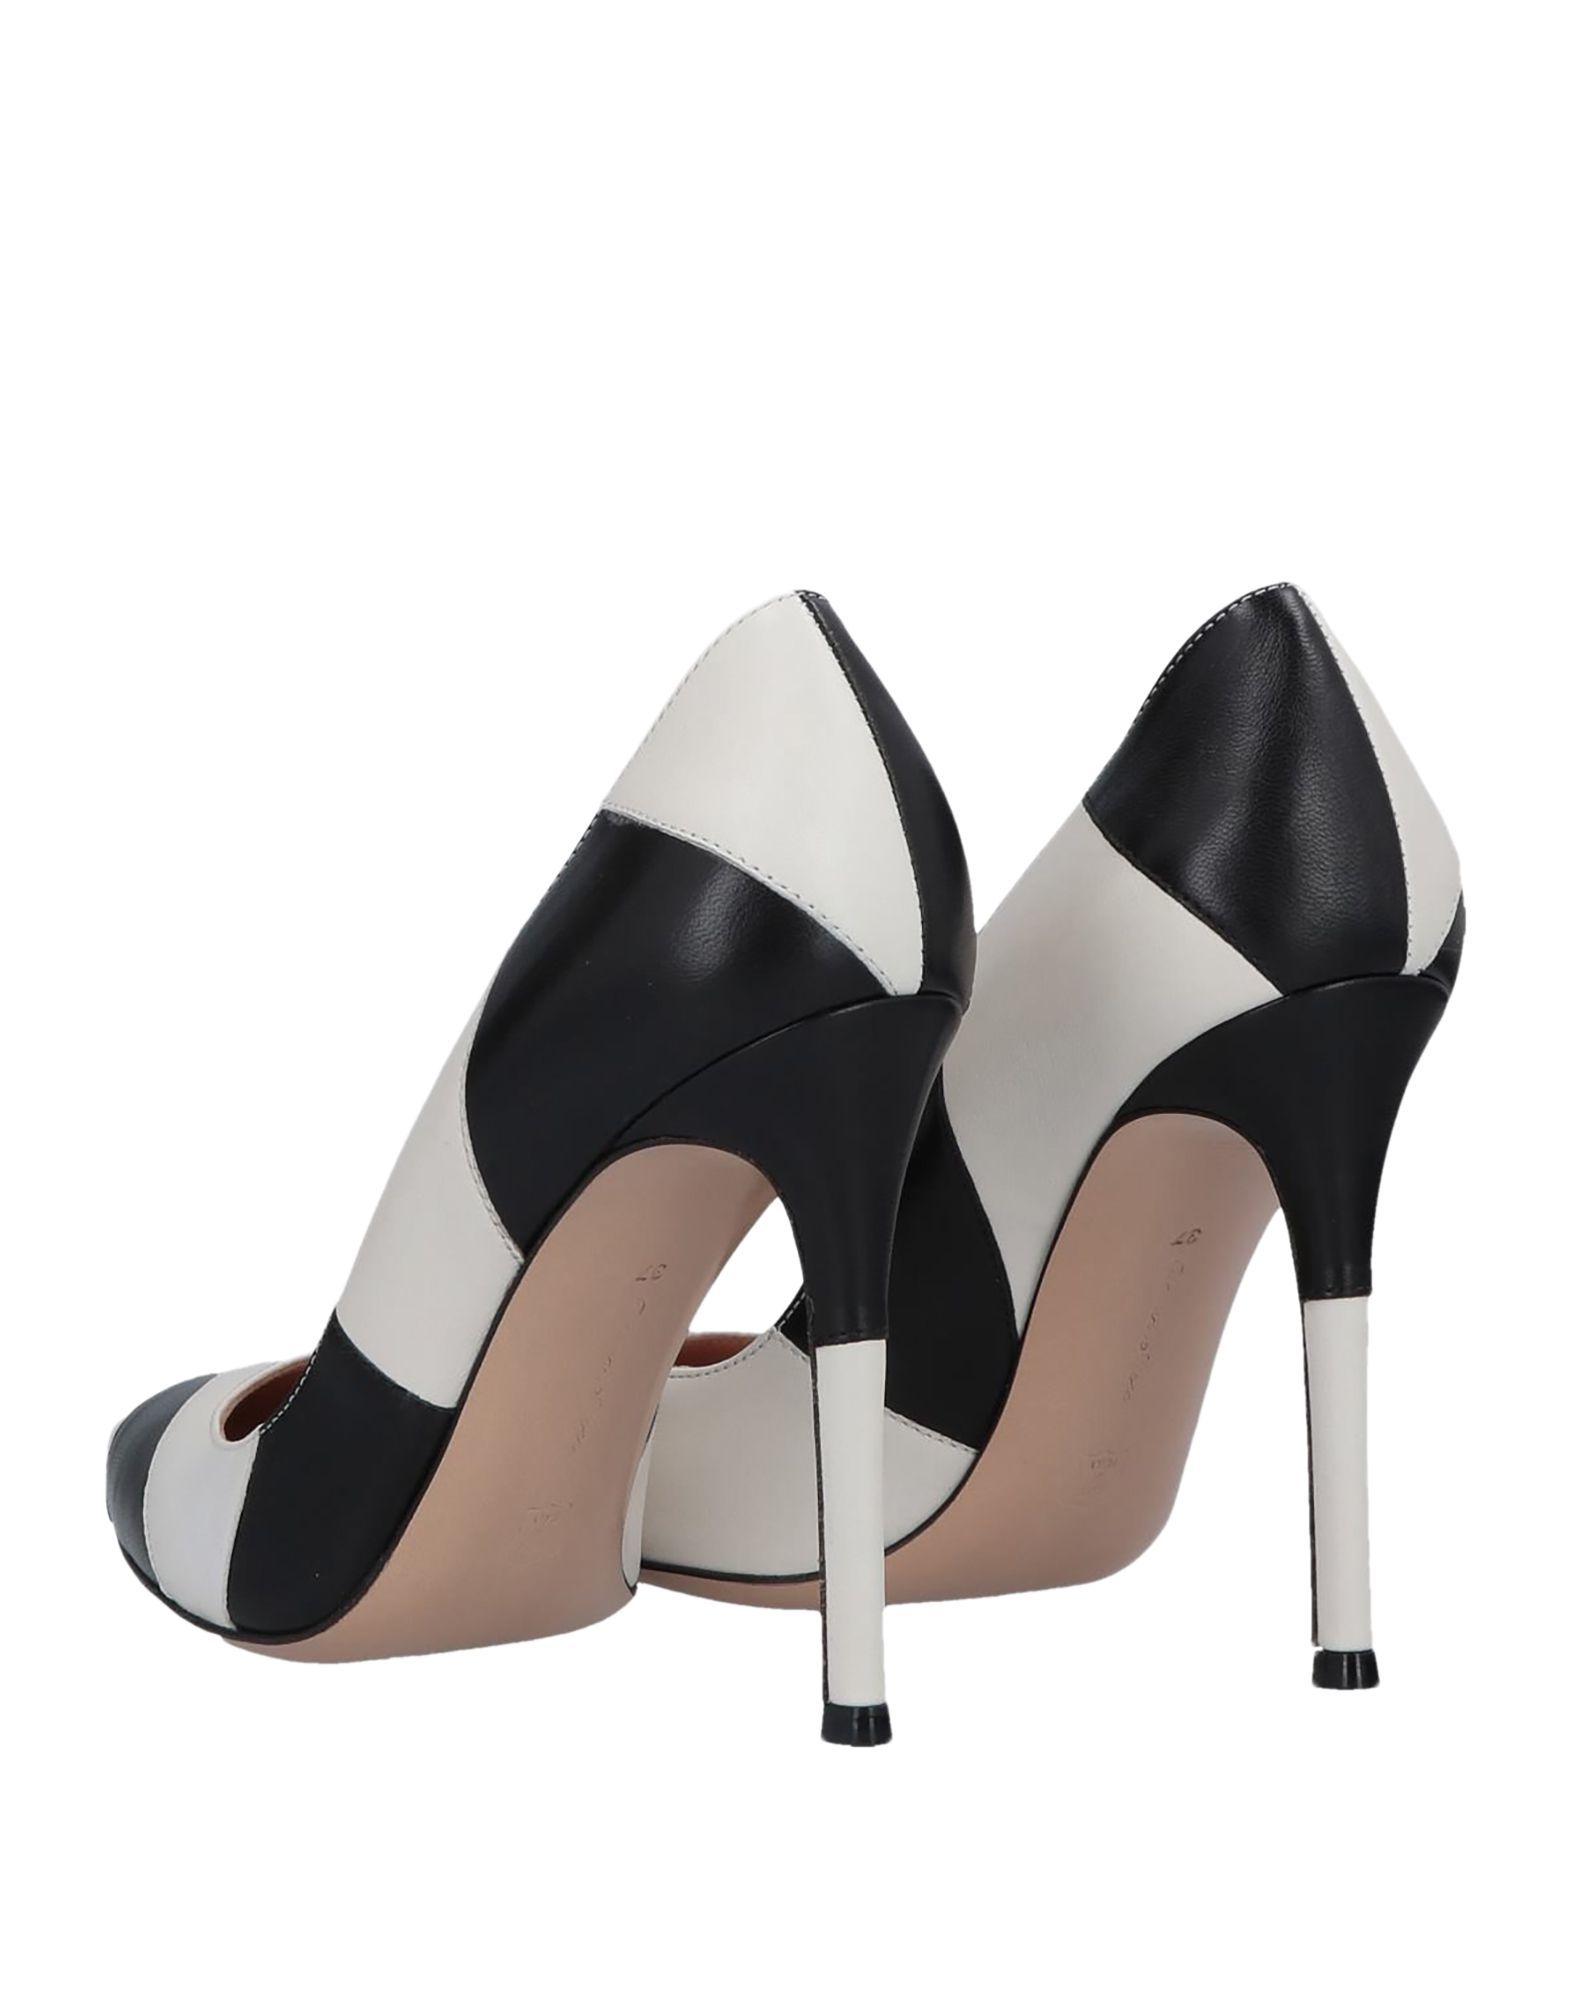 nappa leather, no appliqués, two-tone, narrow toeline, stiletto heel, covered heel, leather lining, leather sole, contains non-textile parts of animal origin